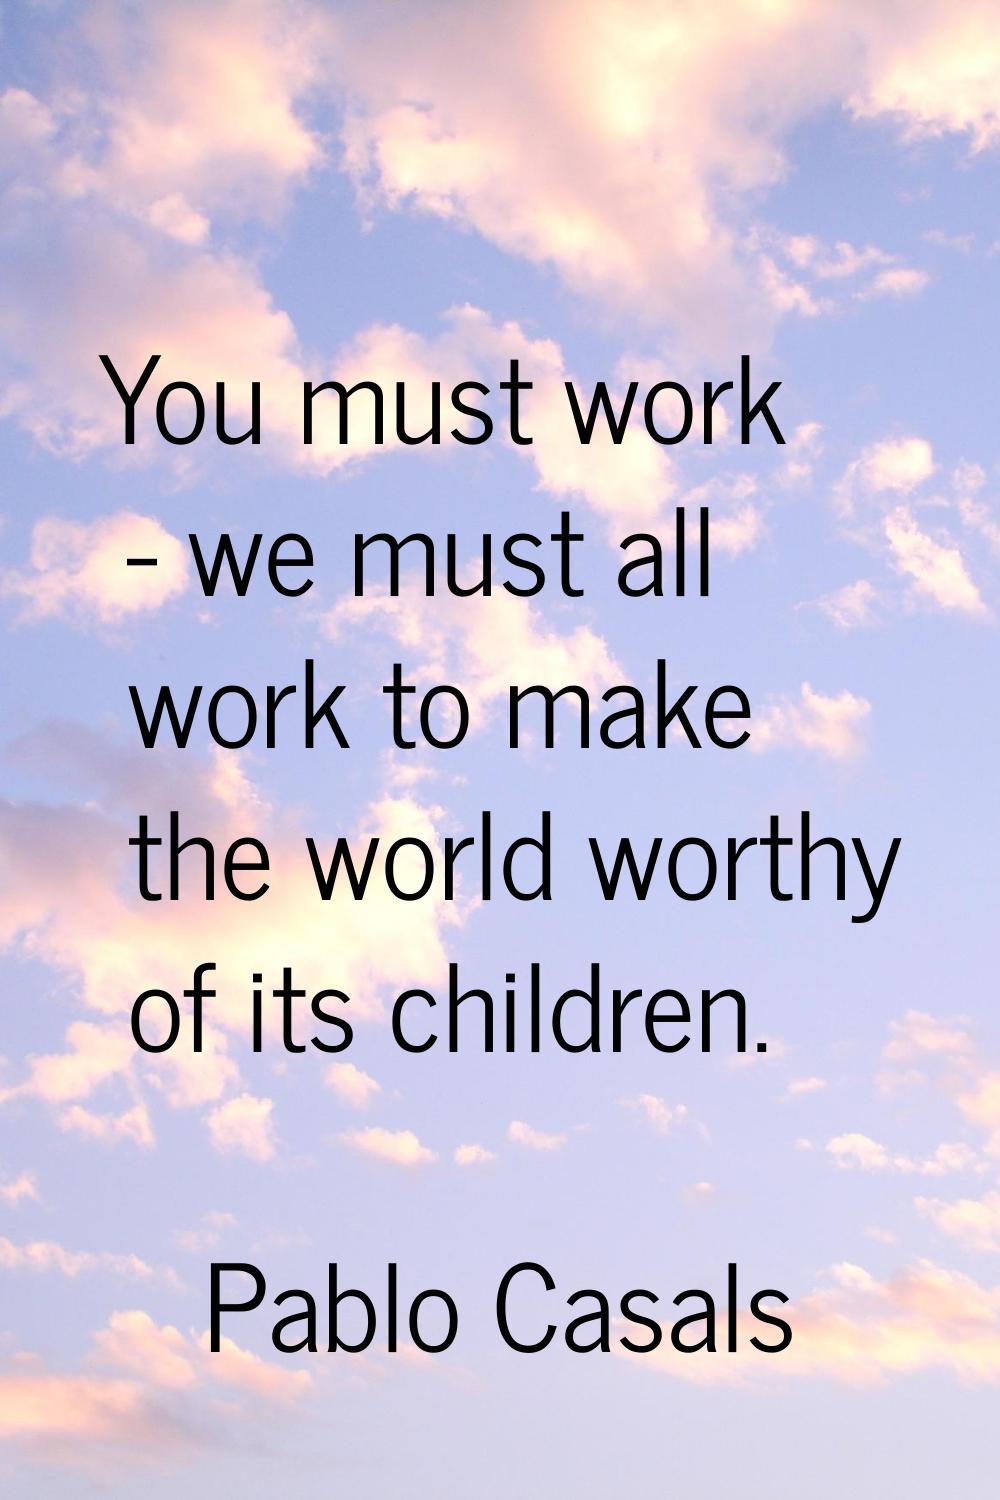 You must work - we must all work to make the world worthy of its children.